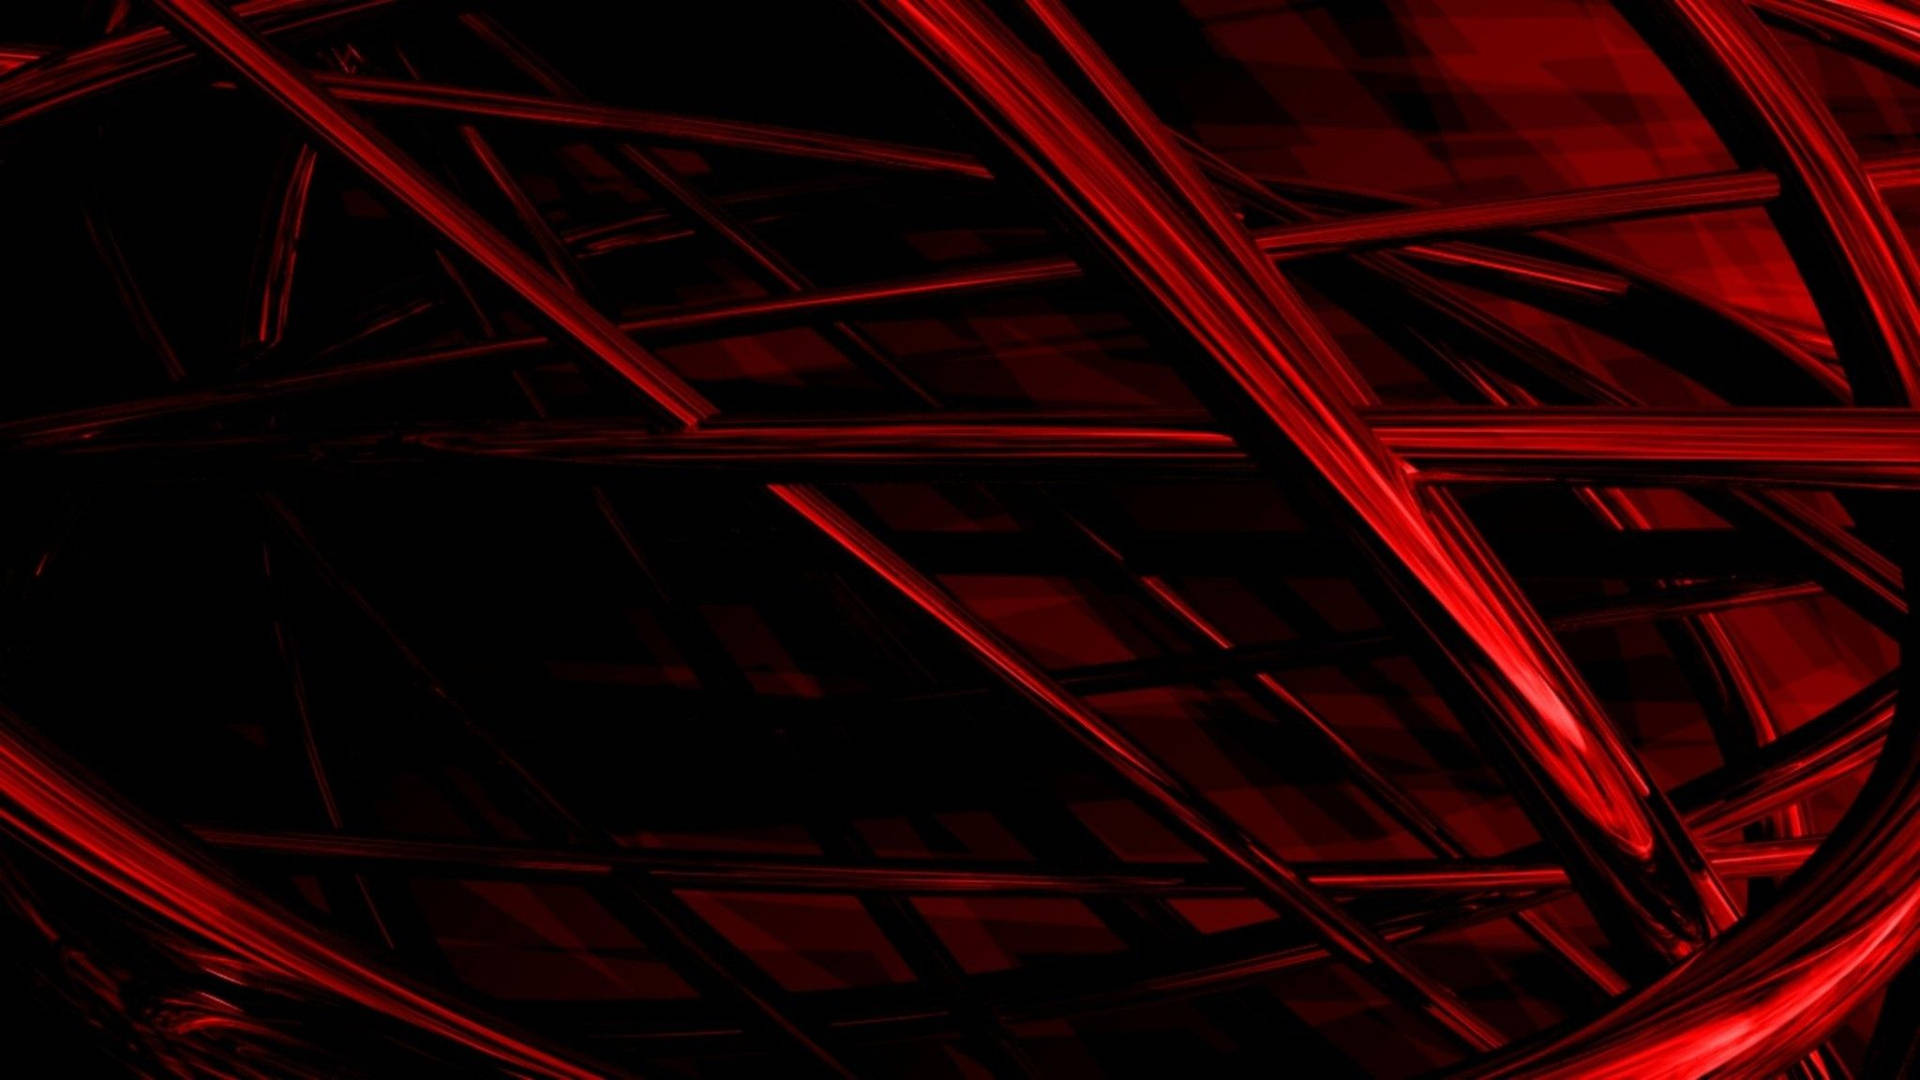 Cool Red Metallic Rods Background